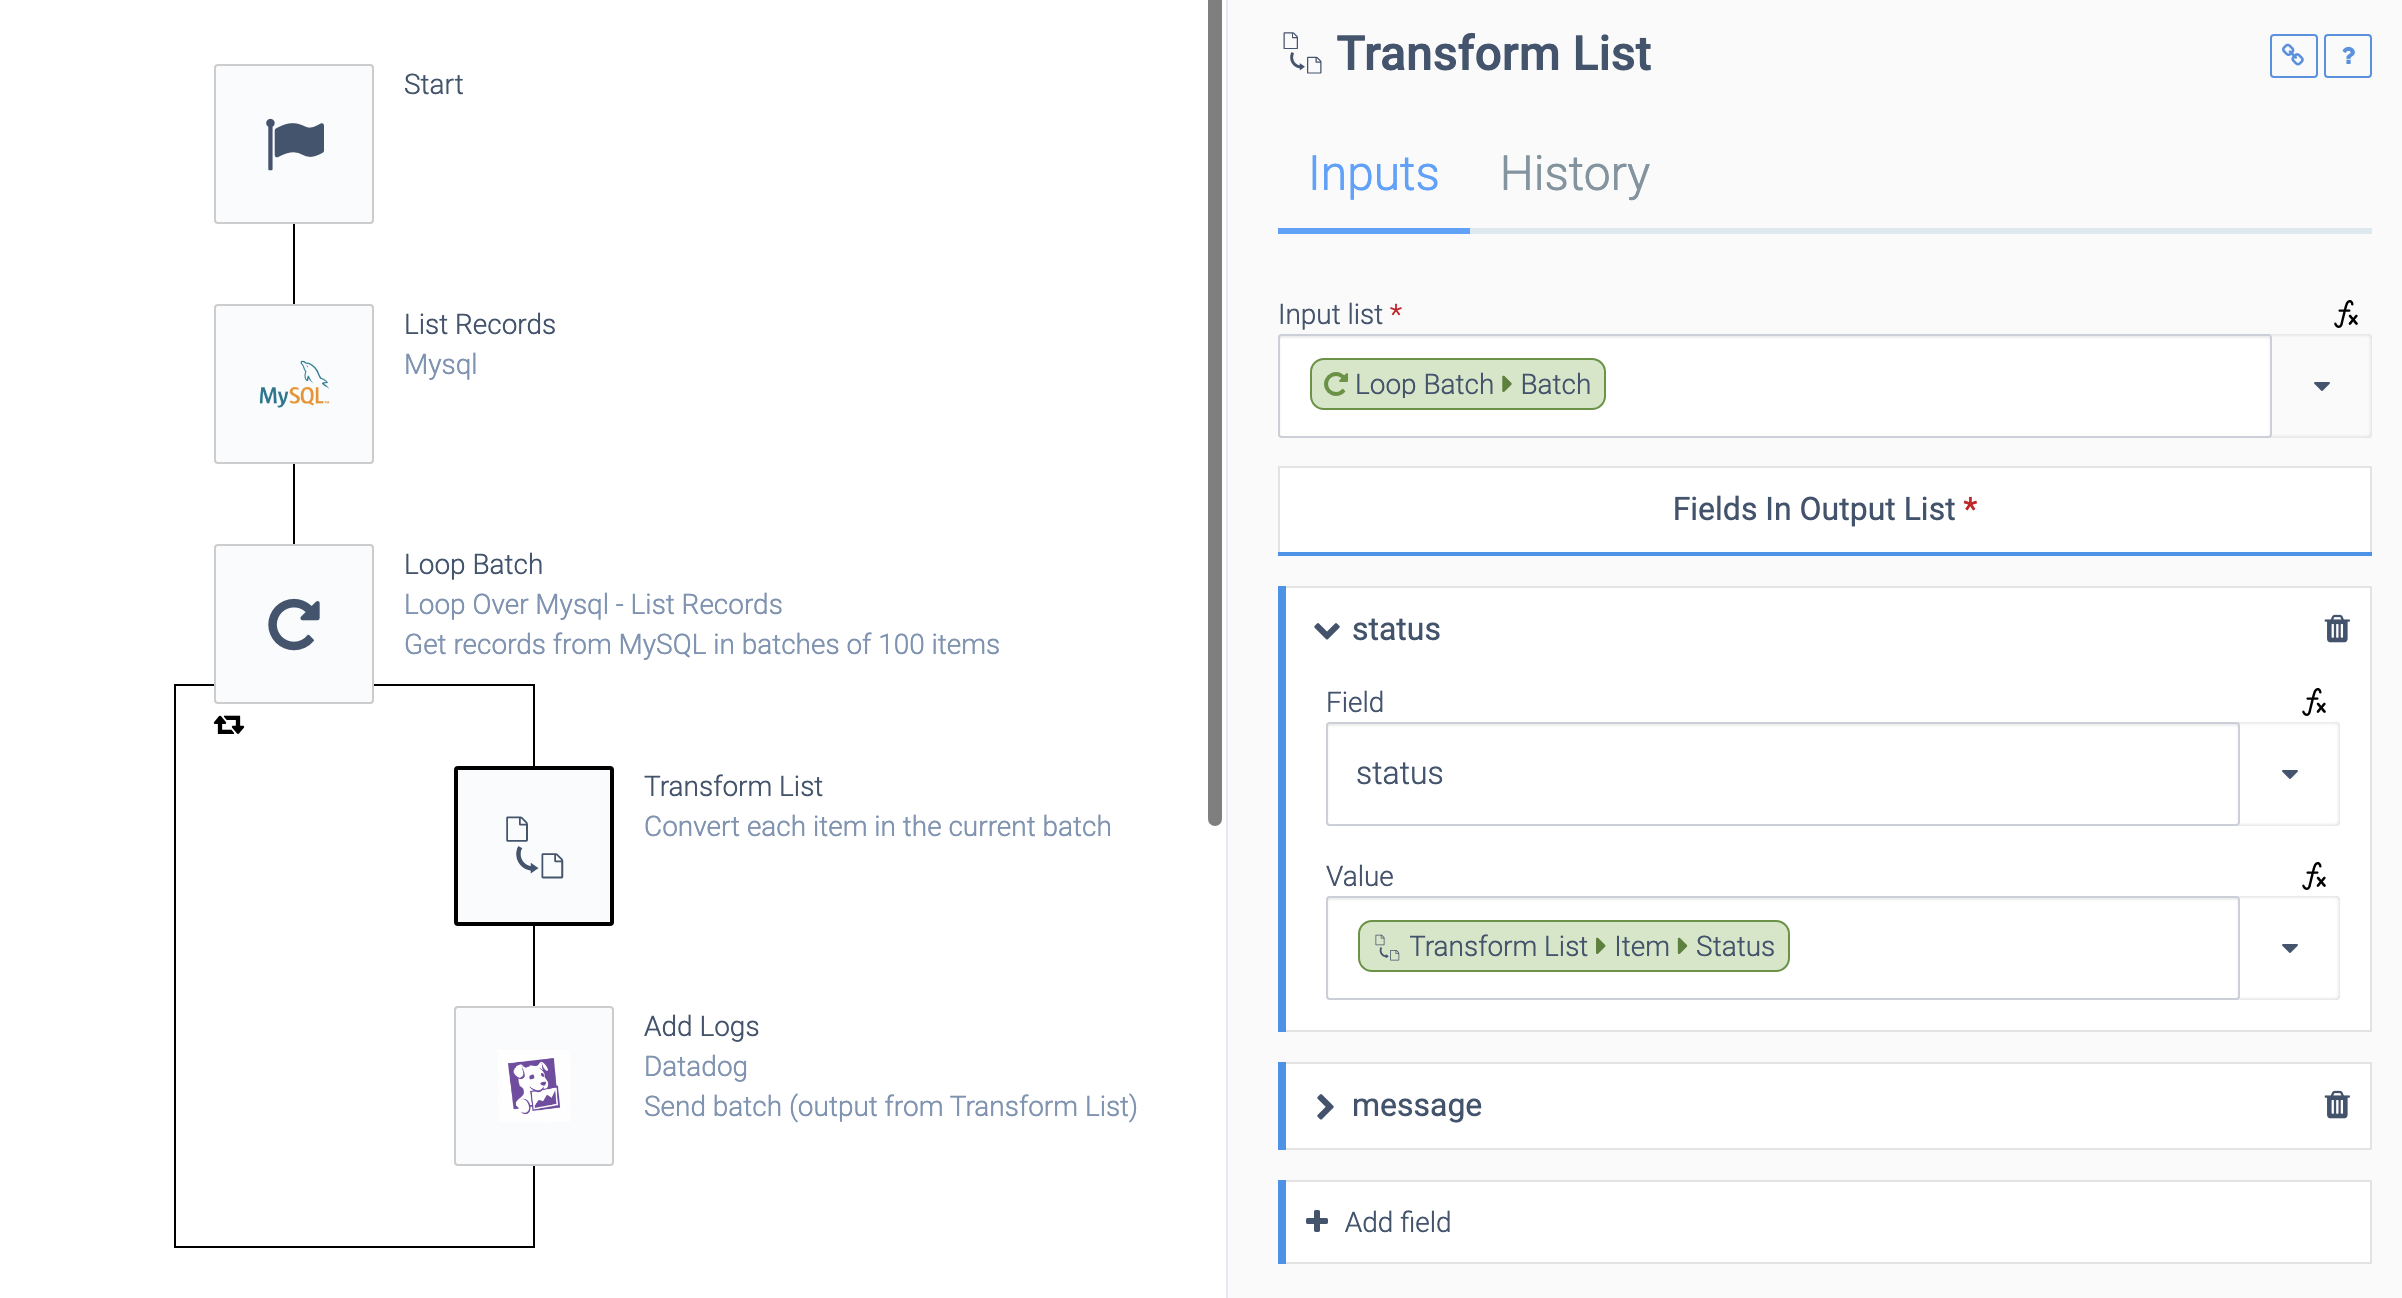 an automation consisting of a Start block, a List Records block, and a Loop Batch block containing a Transform List block and an Add Logs block in its loop. The Transform List block is selected. The Input list is set to Loop Batch > Batch, and under the status dropdown Field is set to status and Value is set to Transform List > Item> Status.